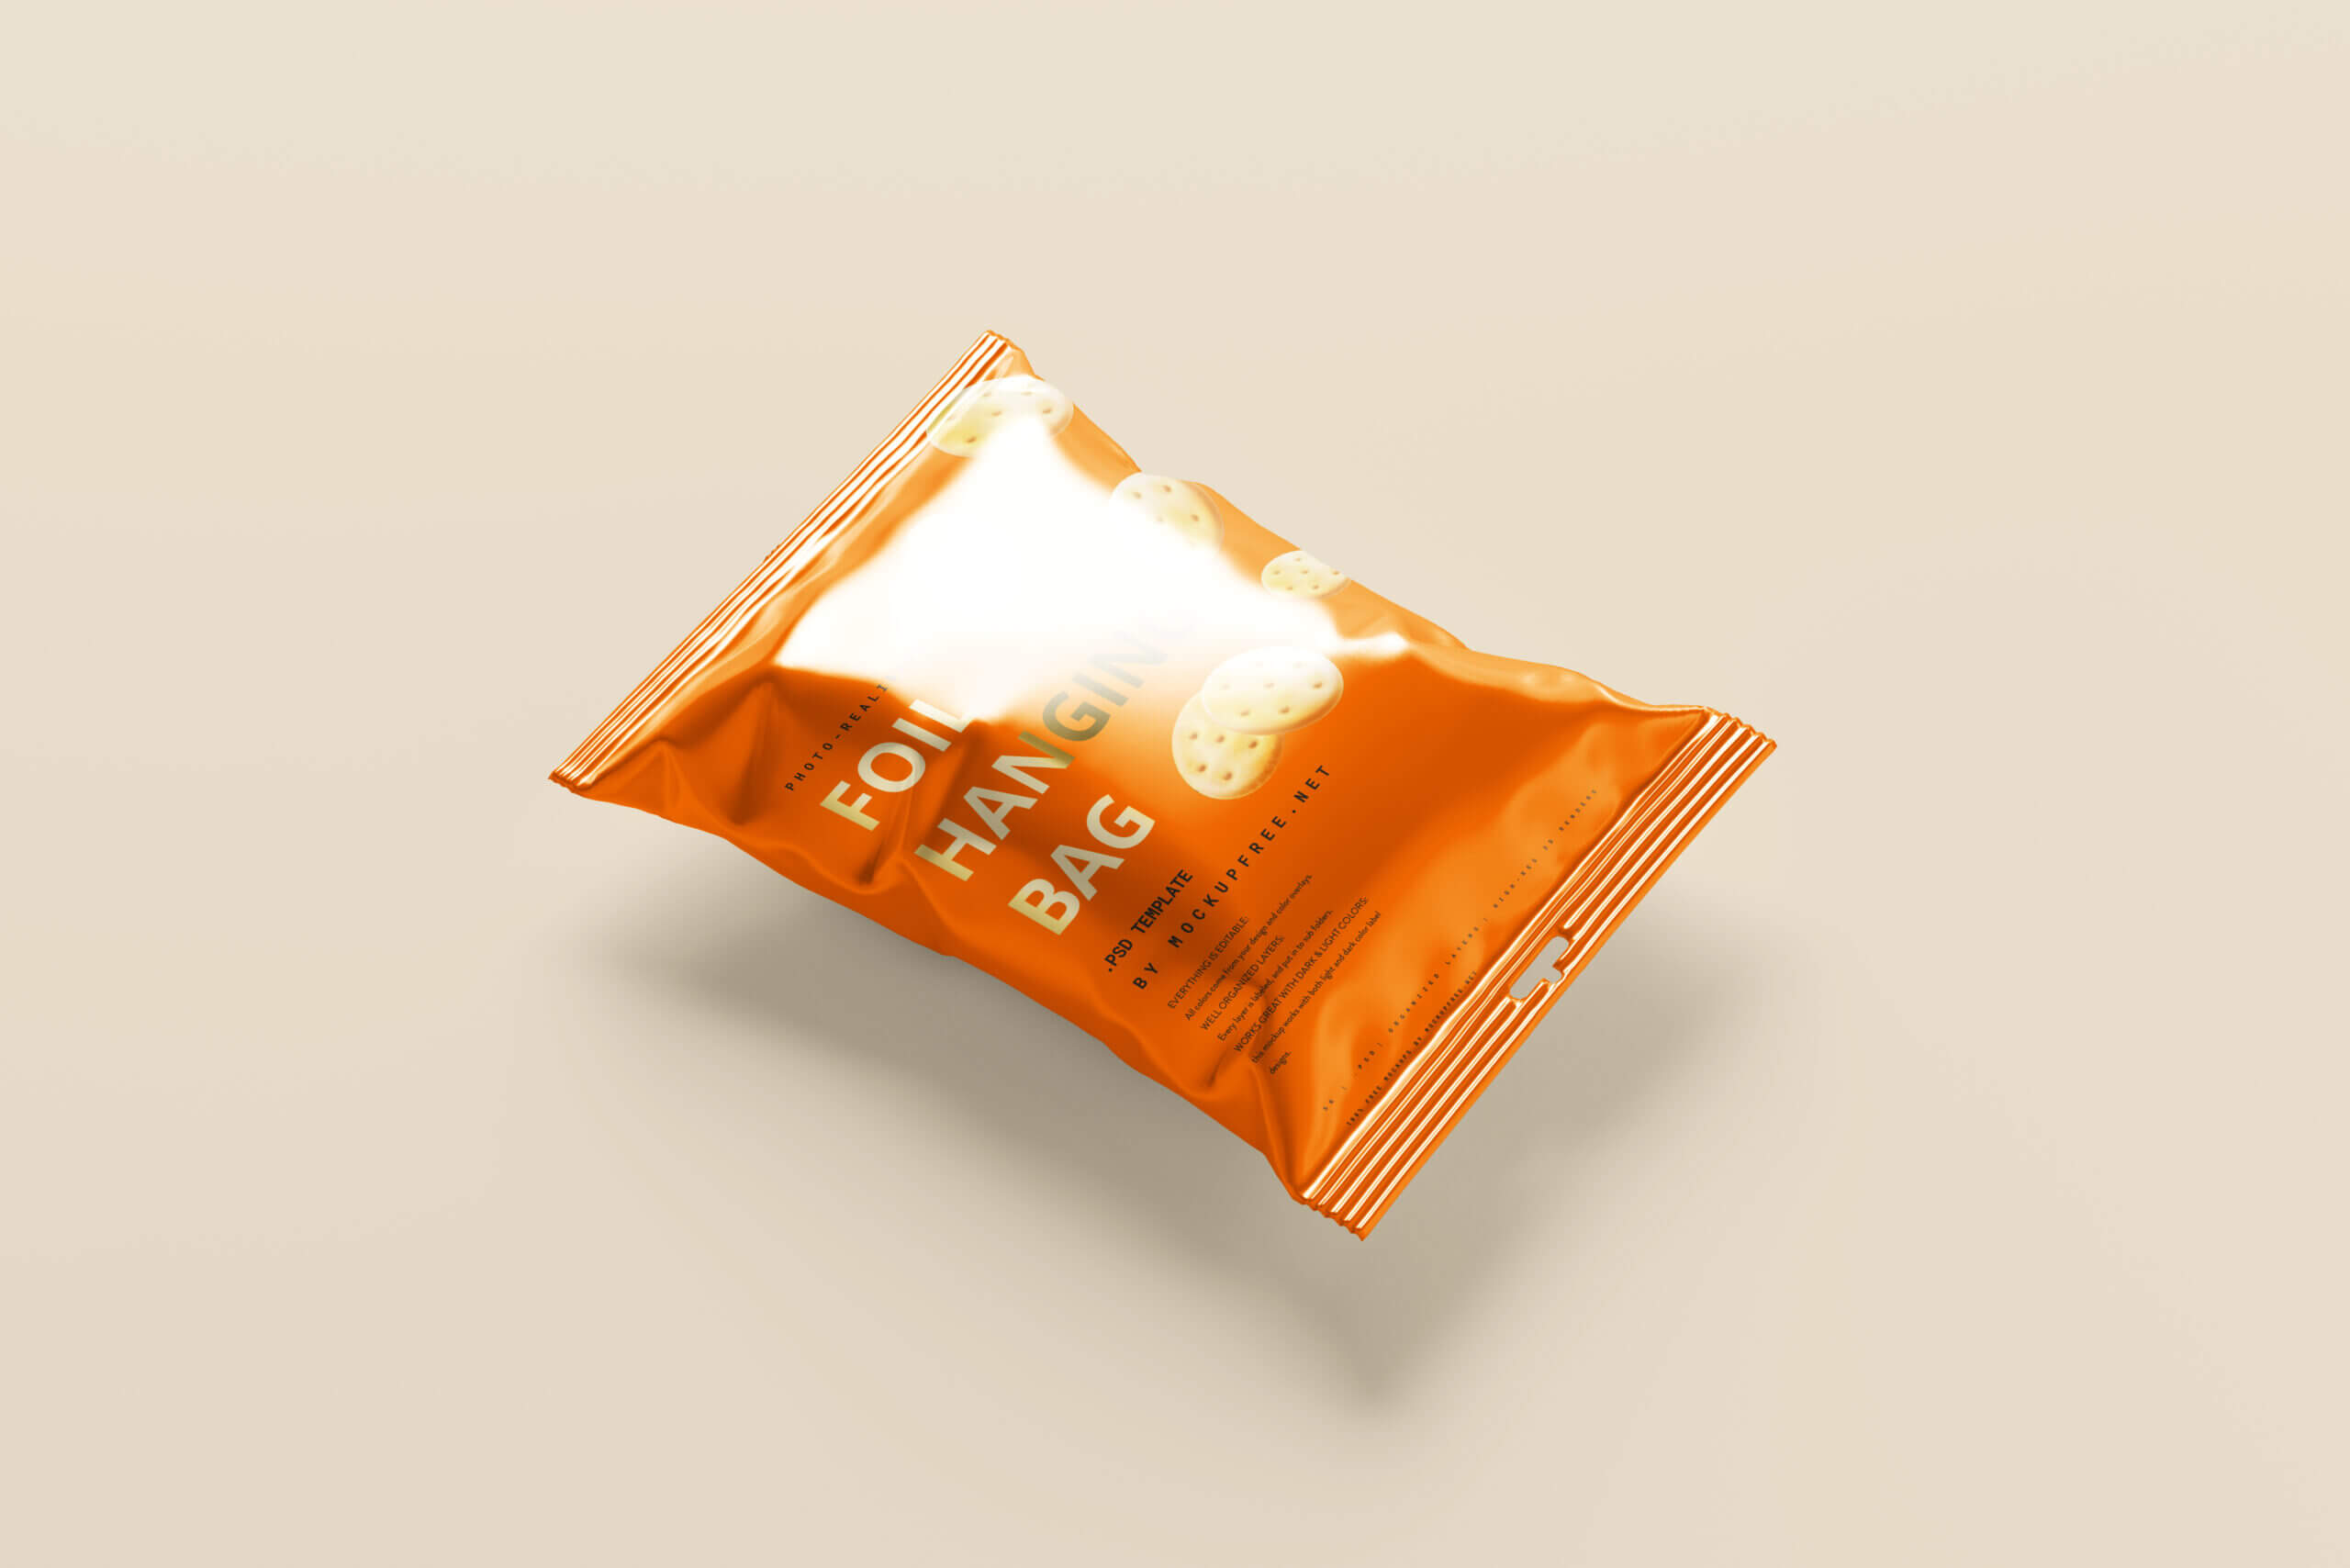 Hanging Snack Bag and Chips Foil Packet Mockups 10 different view5